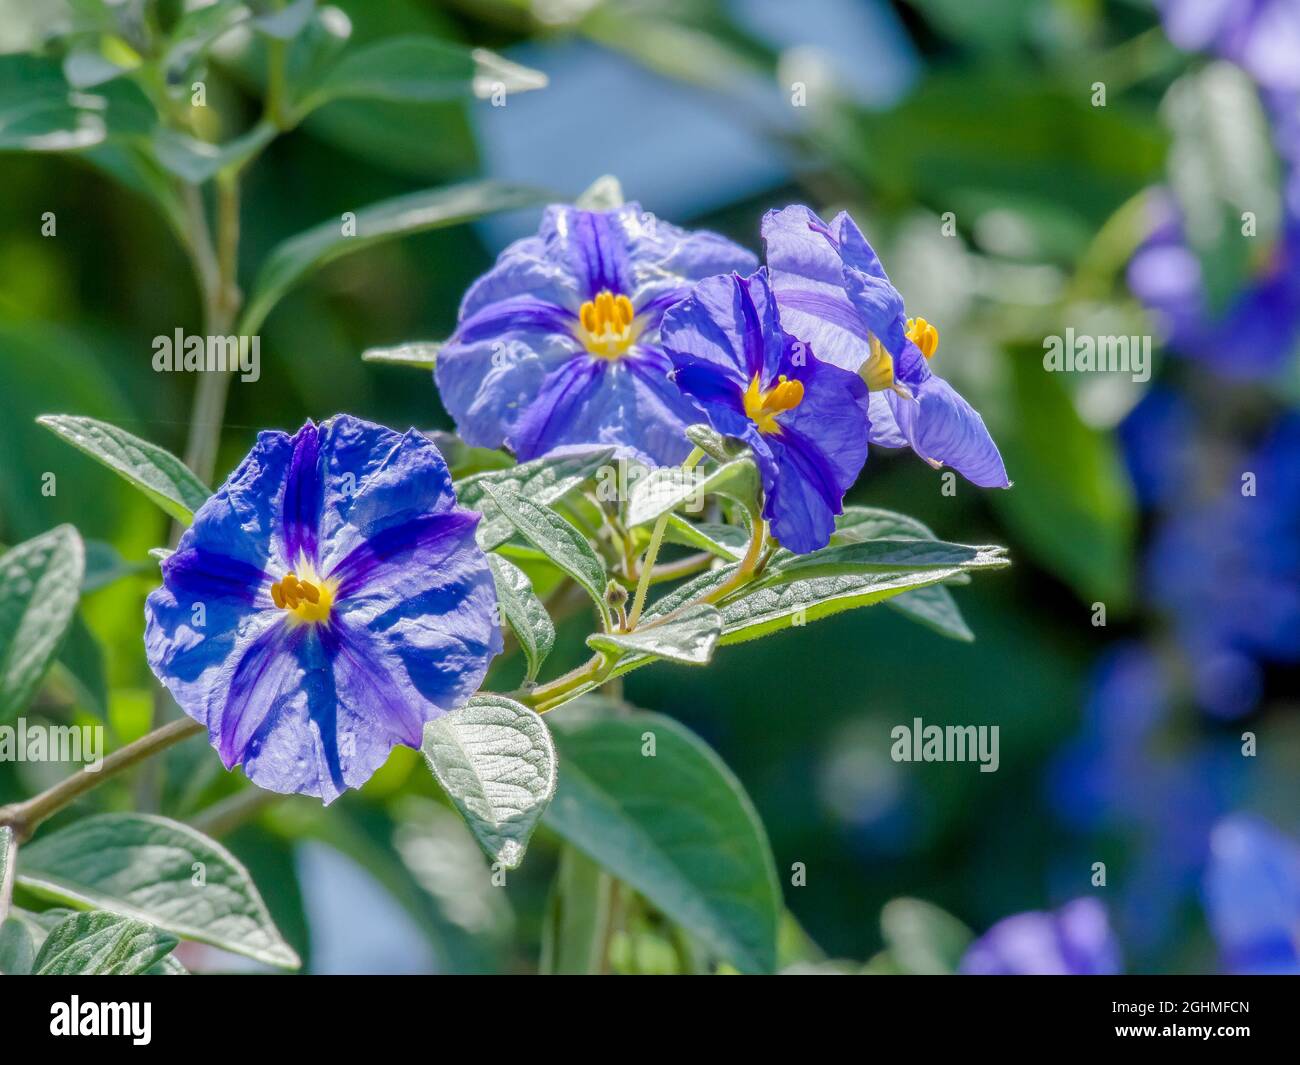 Lycianthes rantonnetii 'Outremer' Stock Photo